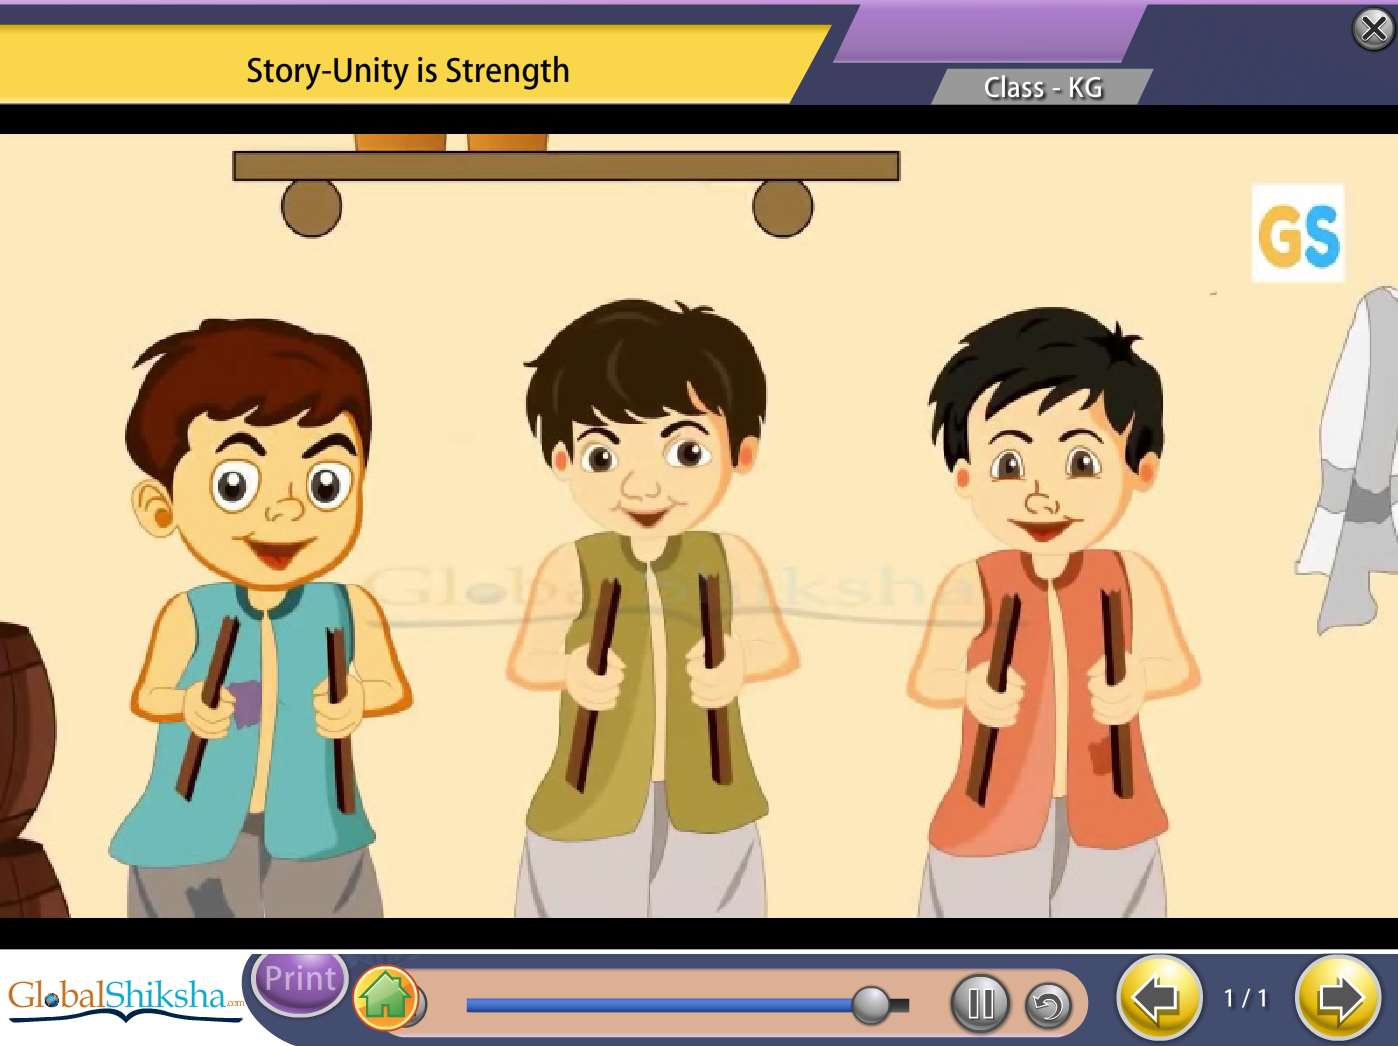 Gujarat State Board LKG General knowledge, Stories & Rhymes Animated Pendrive in English